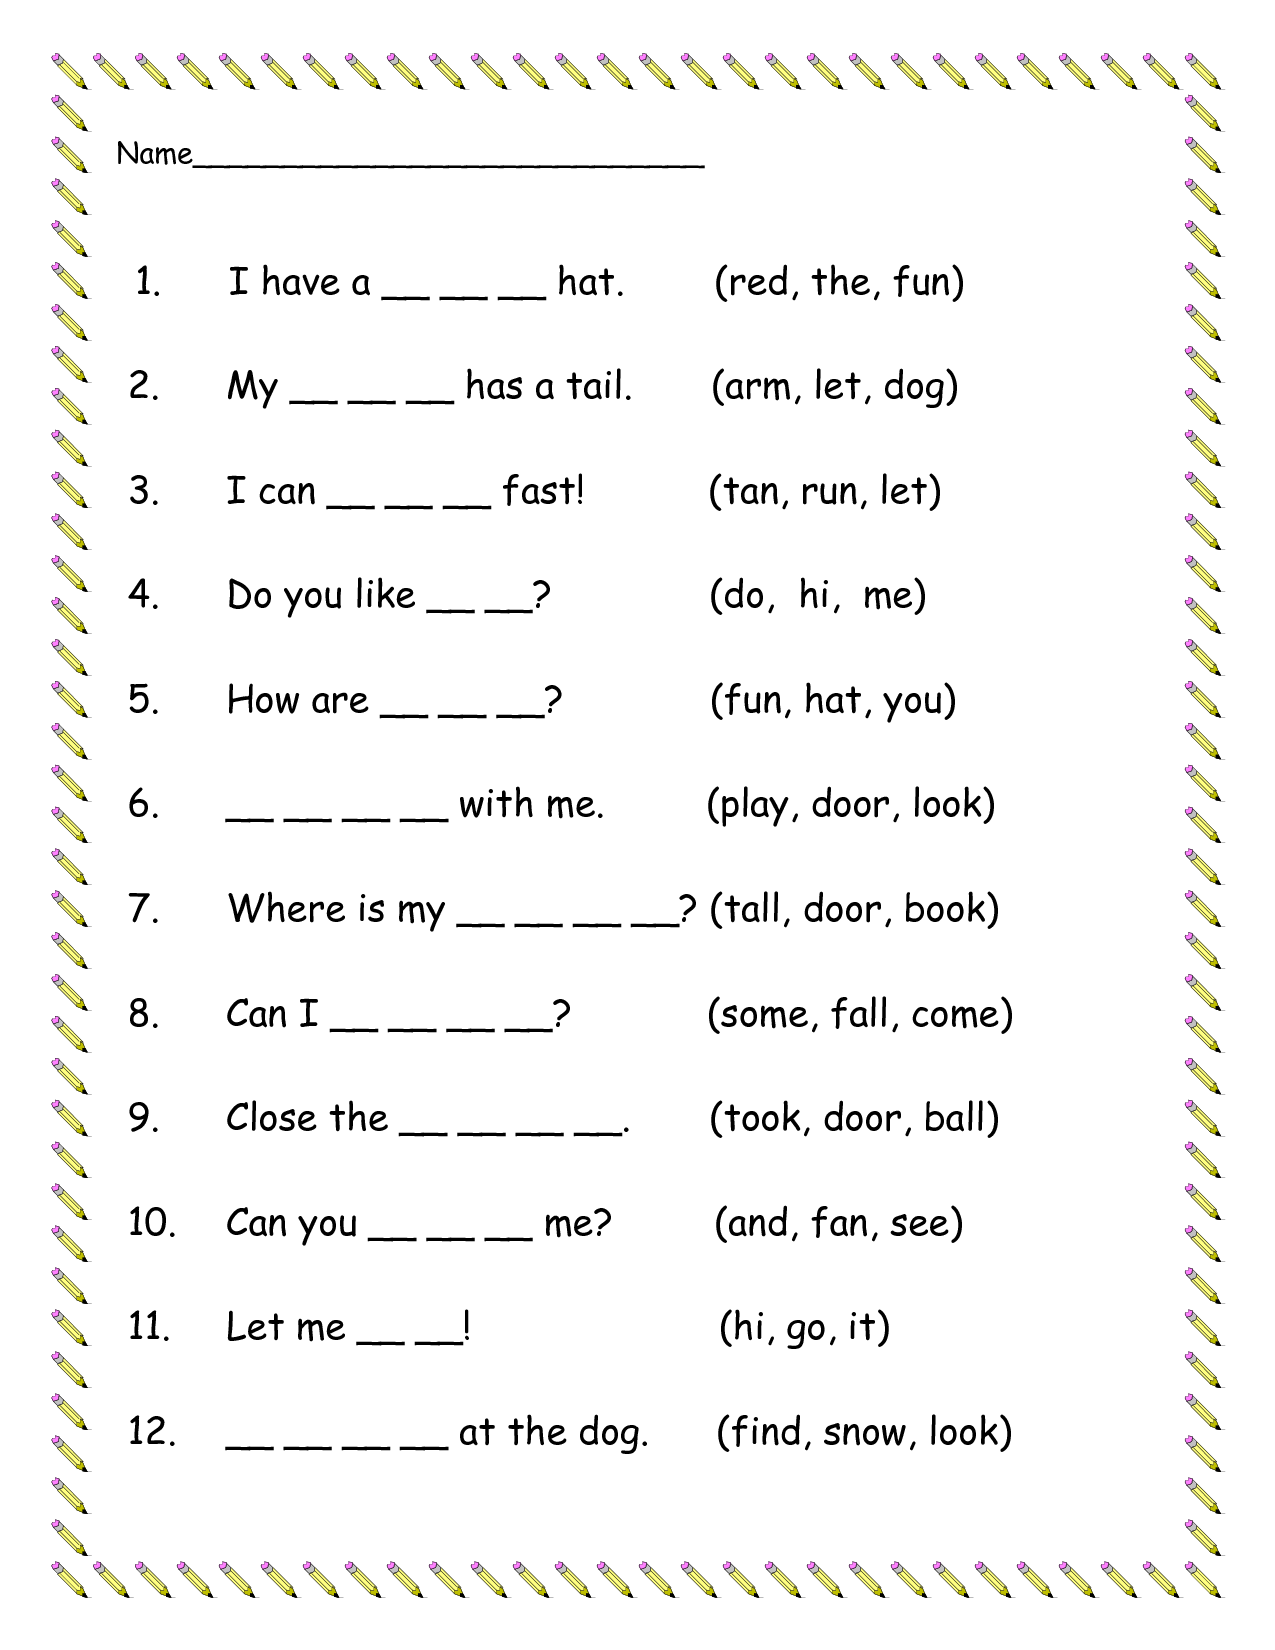 Printable First Grade Sight Words Dolch Lists